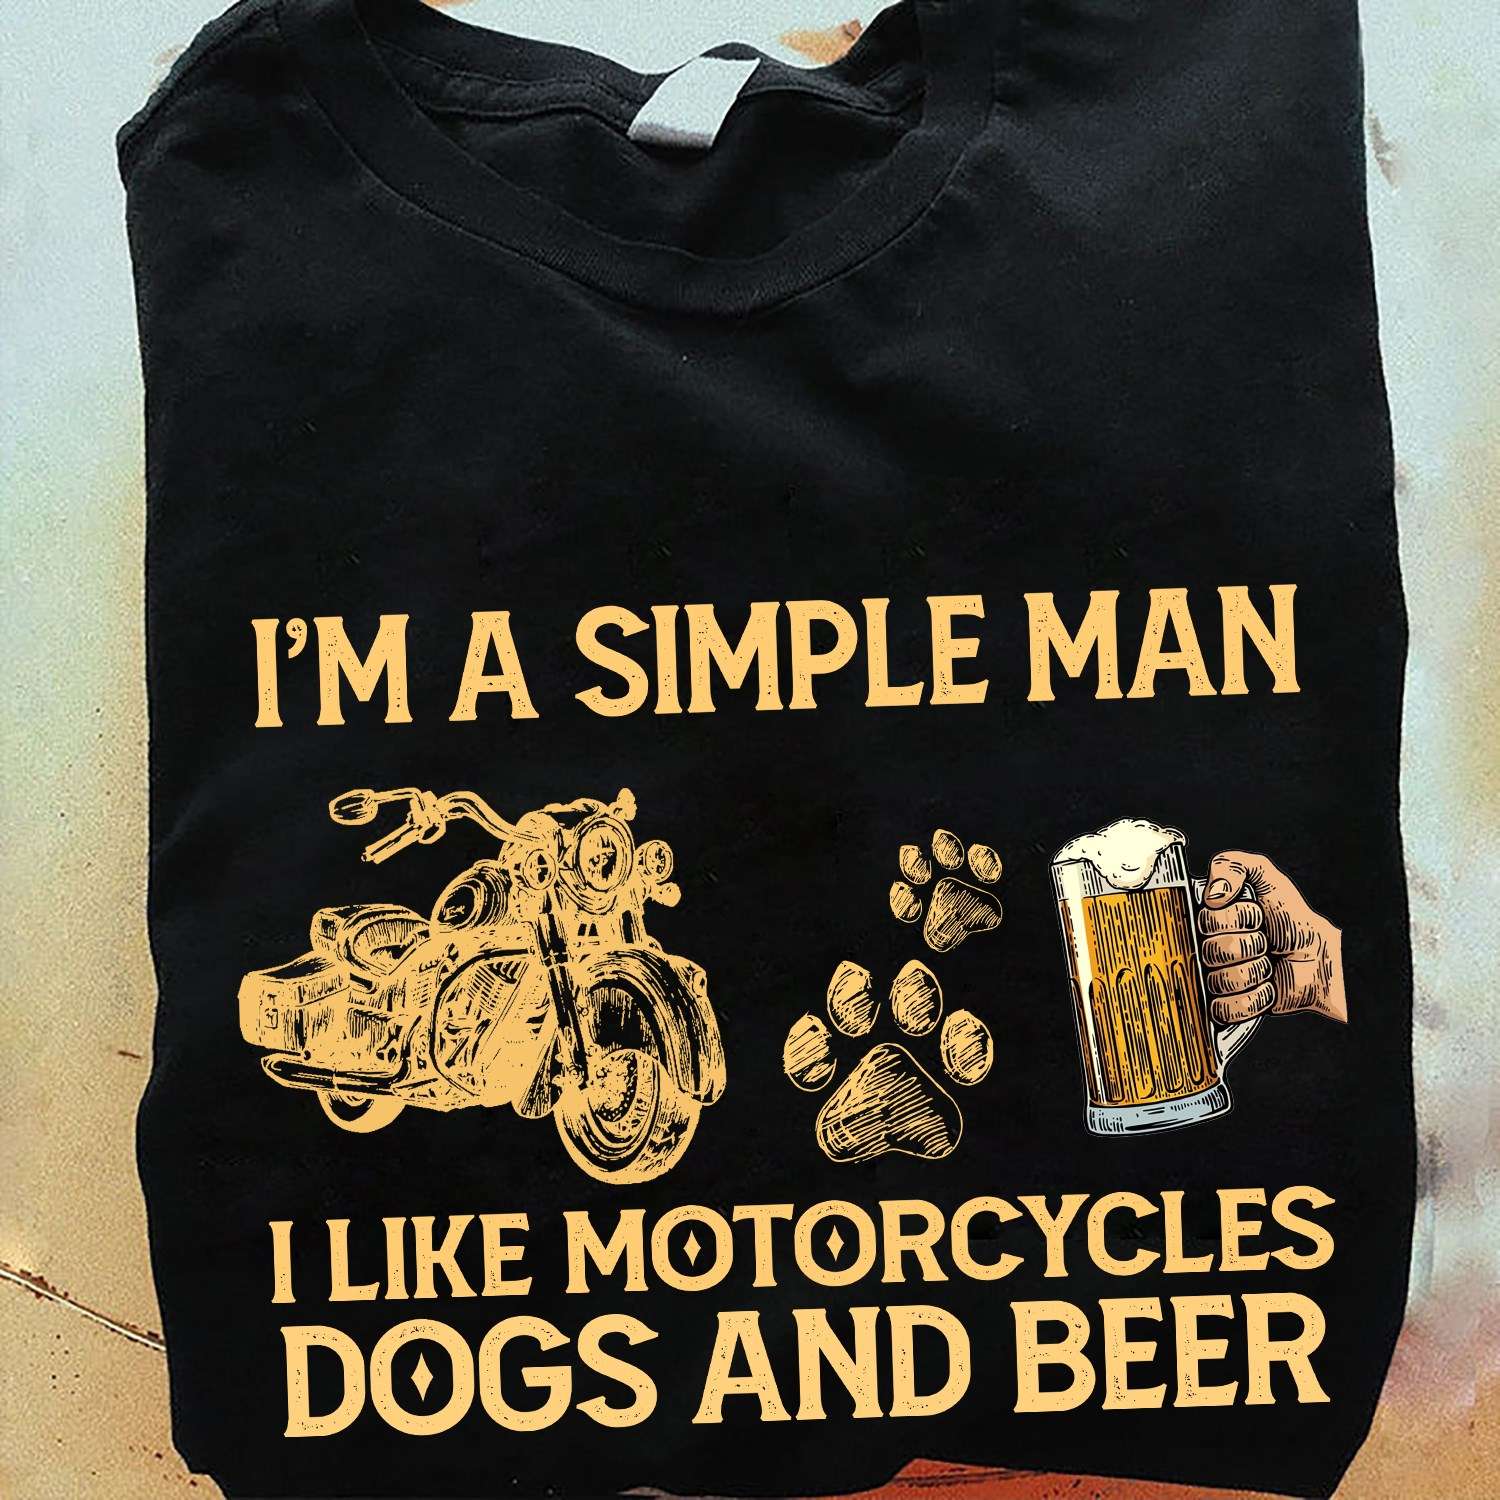 Motorcycle Dog And Beer - I'm a simple man i like motorcycles dogs and beer